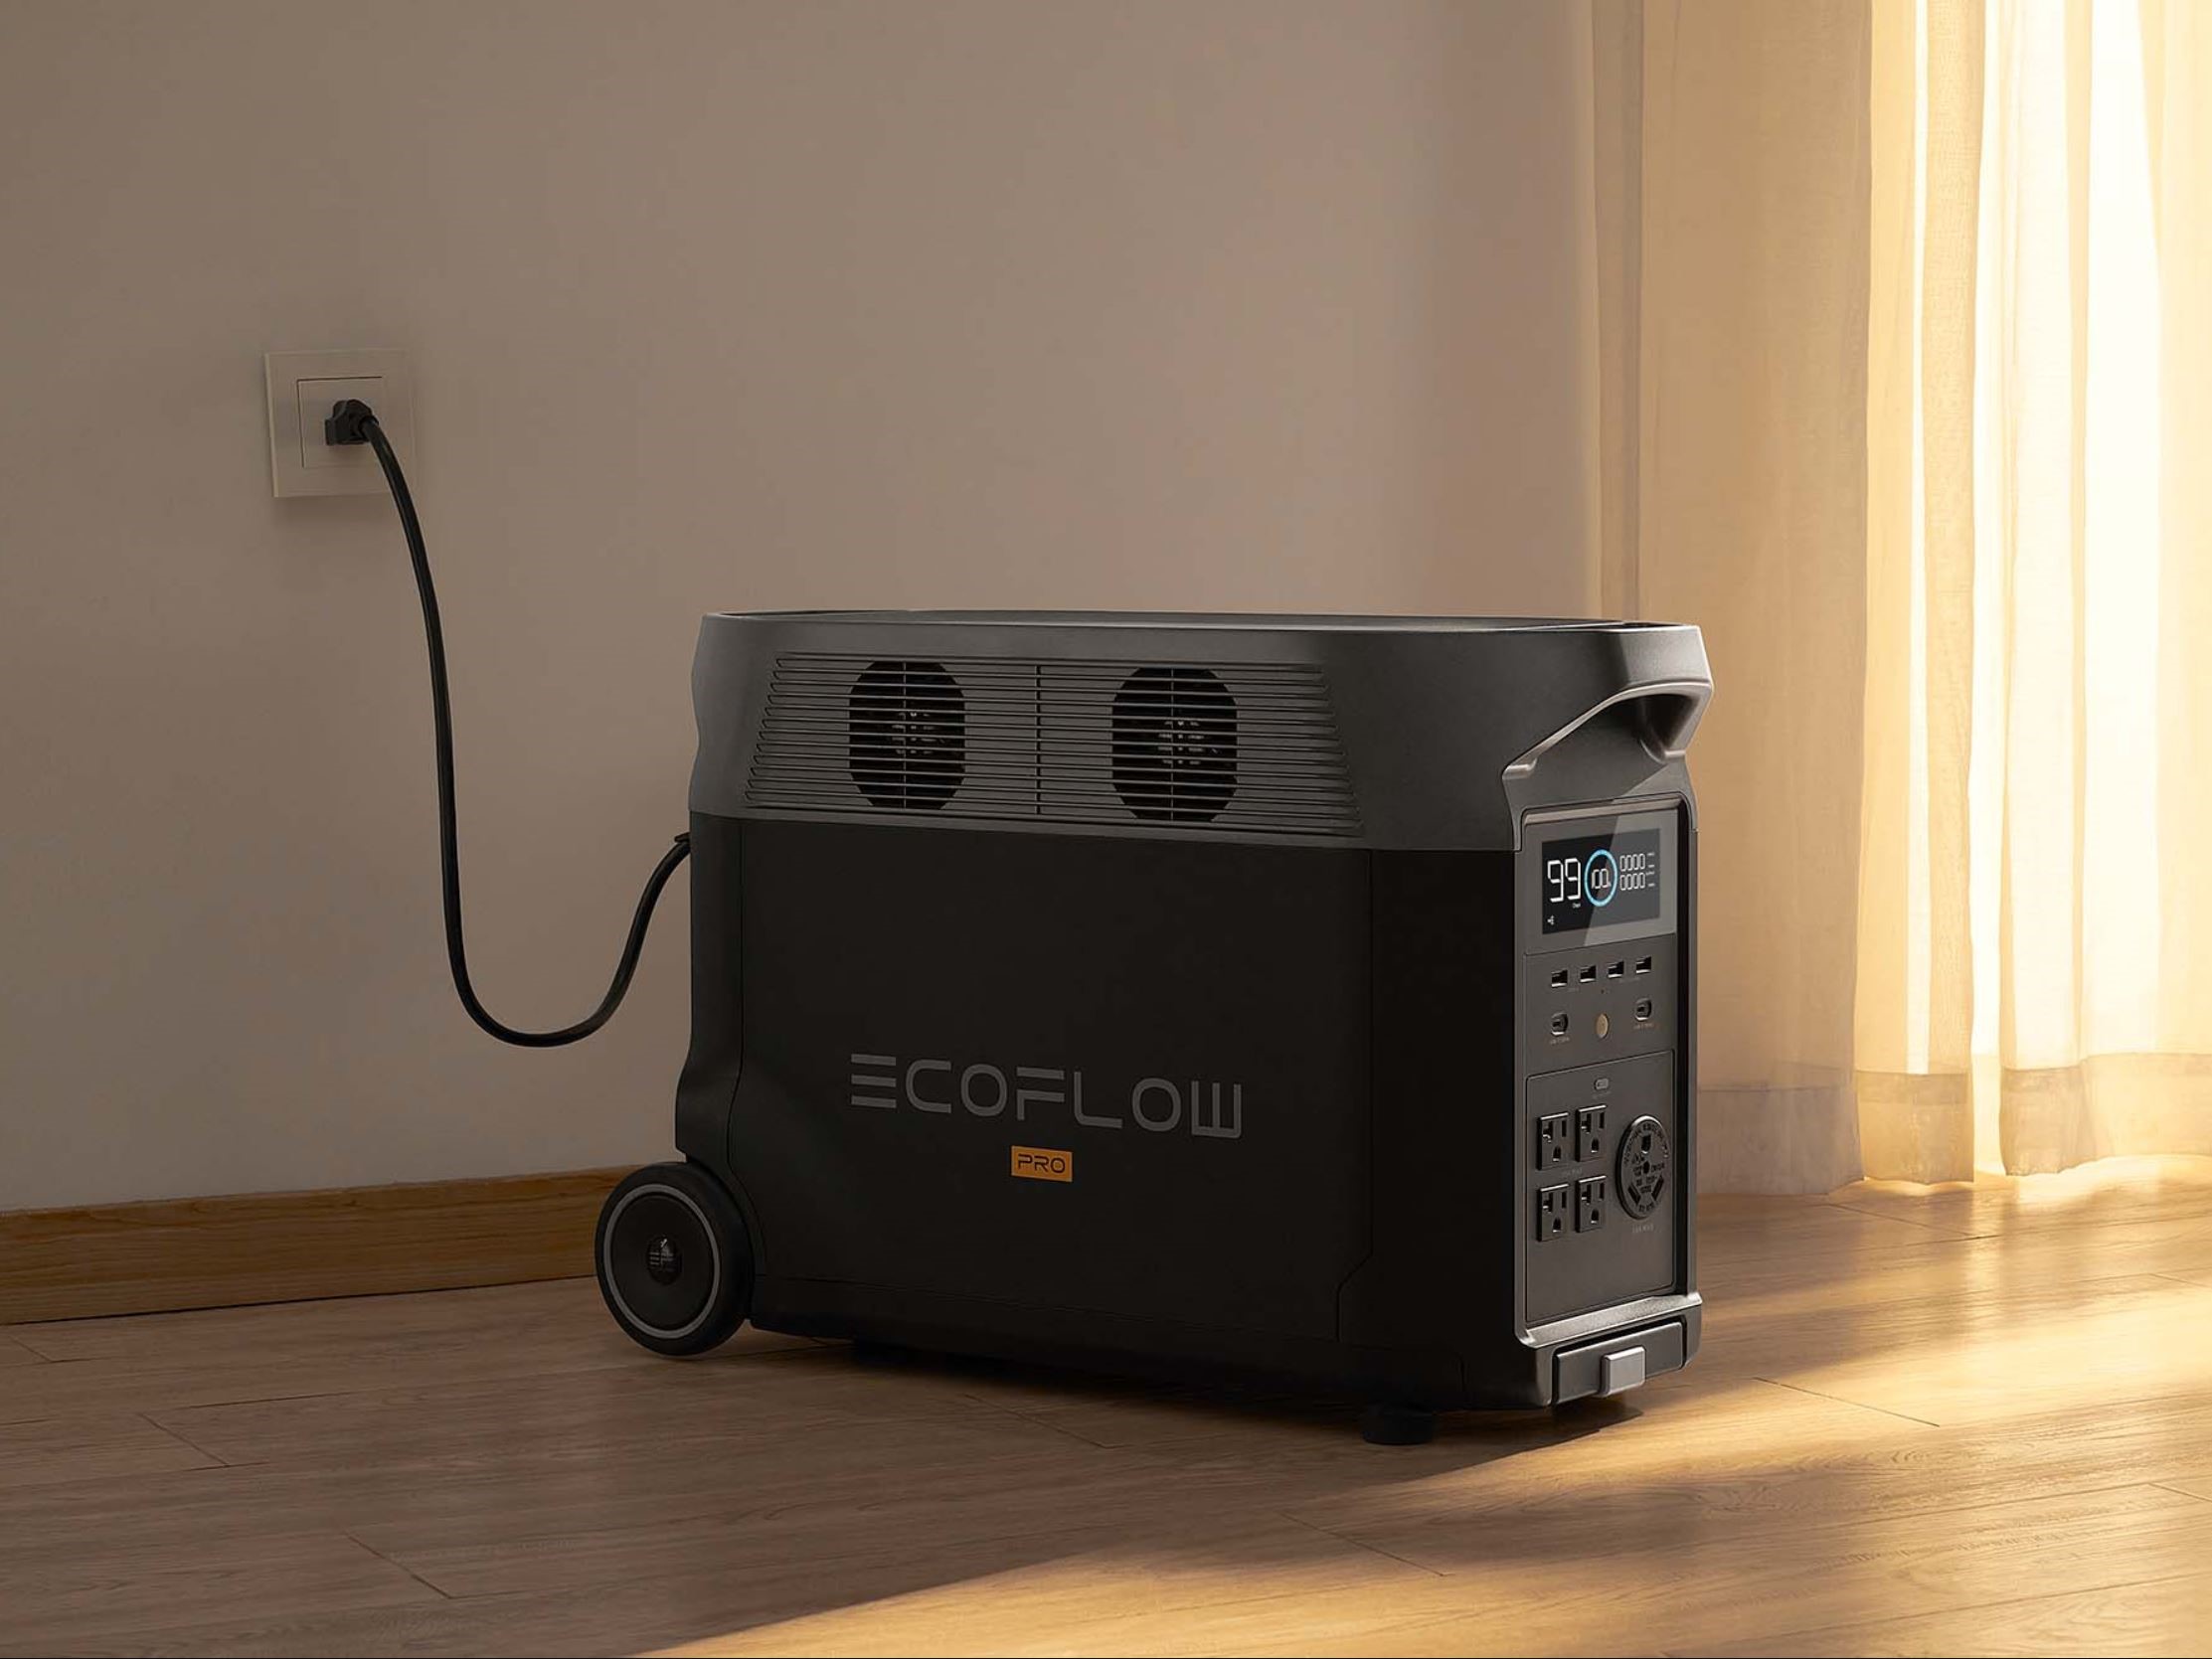 EcoFlow's Delta Pro Home Battery Backup Keeps Your Power On | Digital Trends